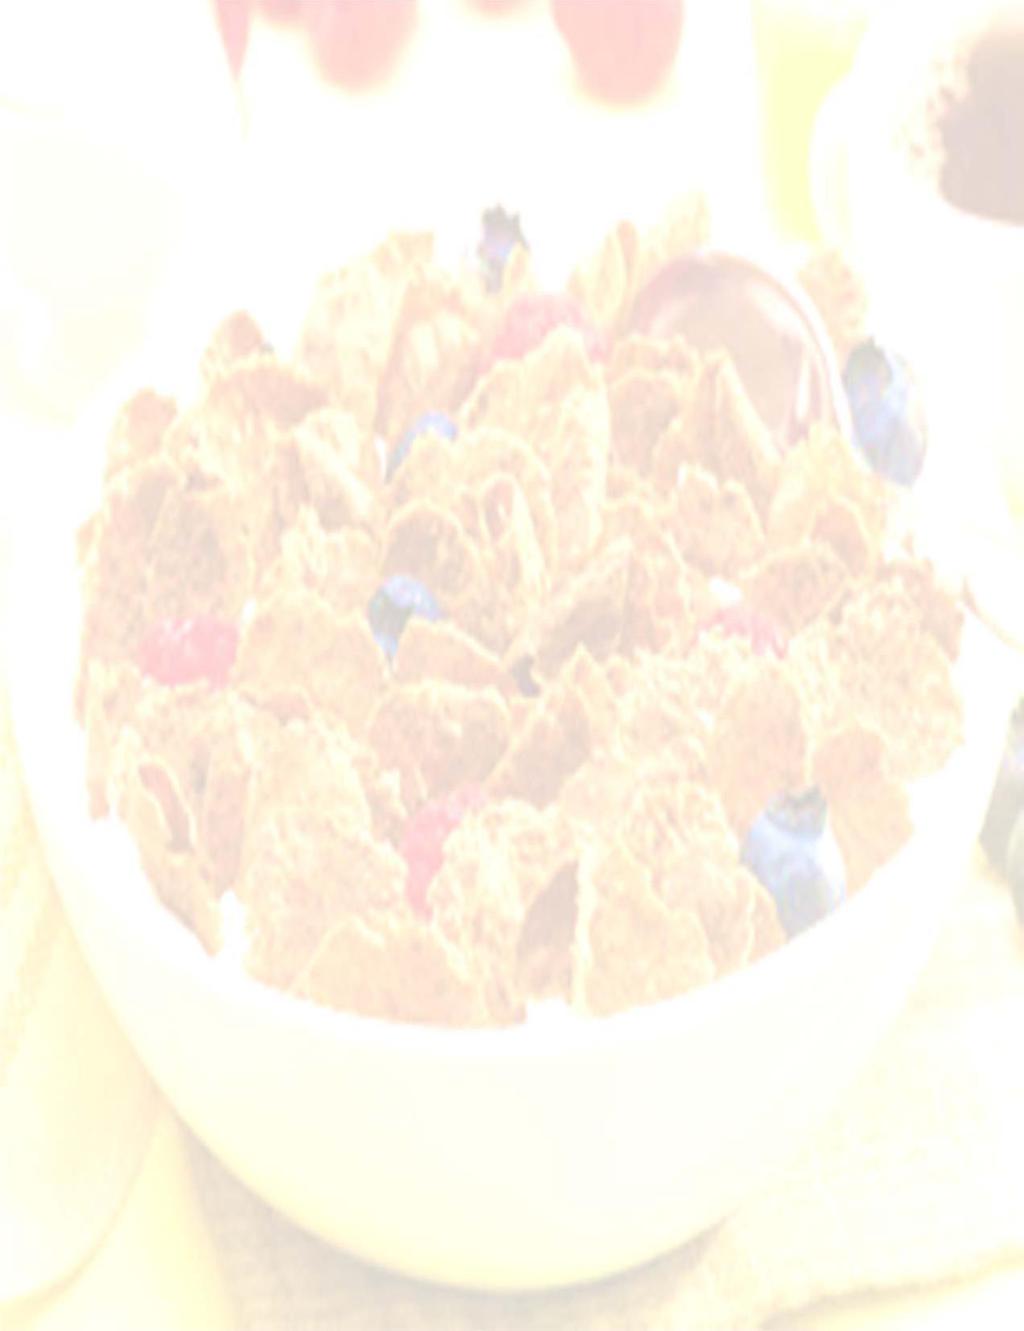 Cereal Sundae 1 ½ cup bran flakes 8 oz. low-fat milk ¼ cup nuts/ fresh dried fruit (optional) 1. Add bran flakes to a bowl with 8 ounces of low-fat milk 2.